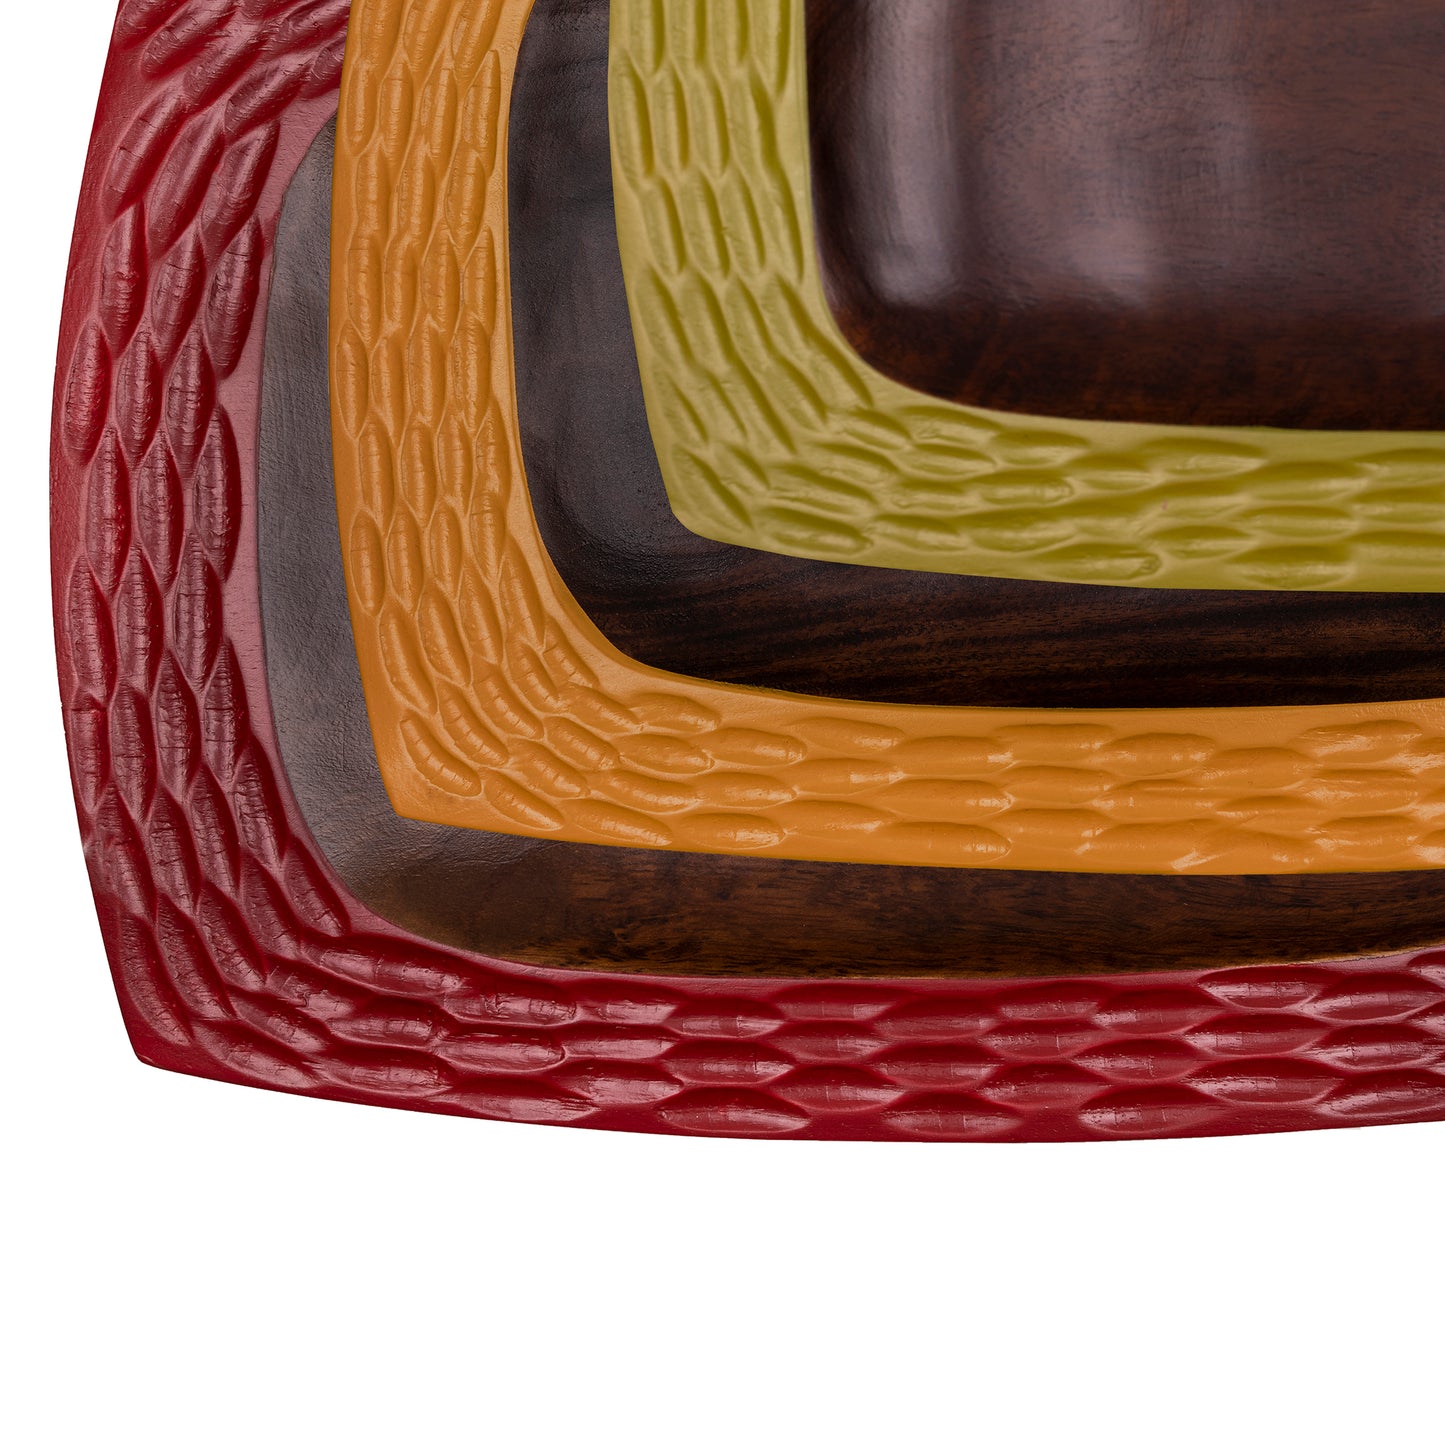 Mango Wood Serving Platter - Available in 4 colors